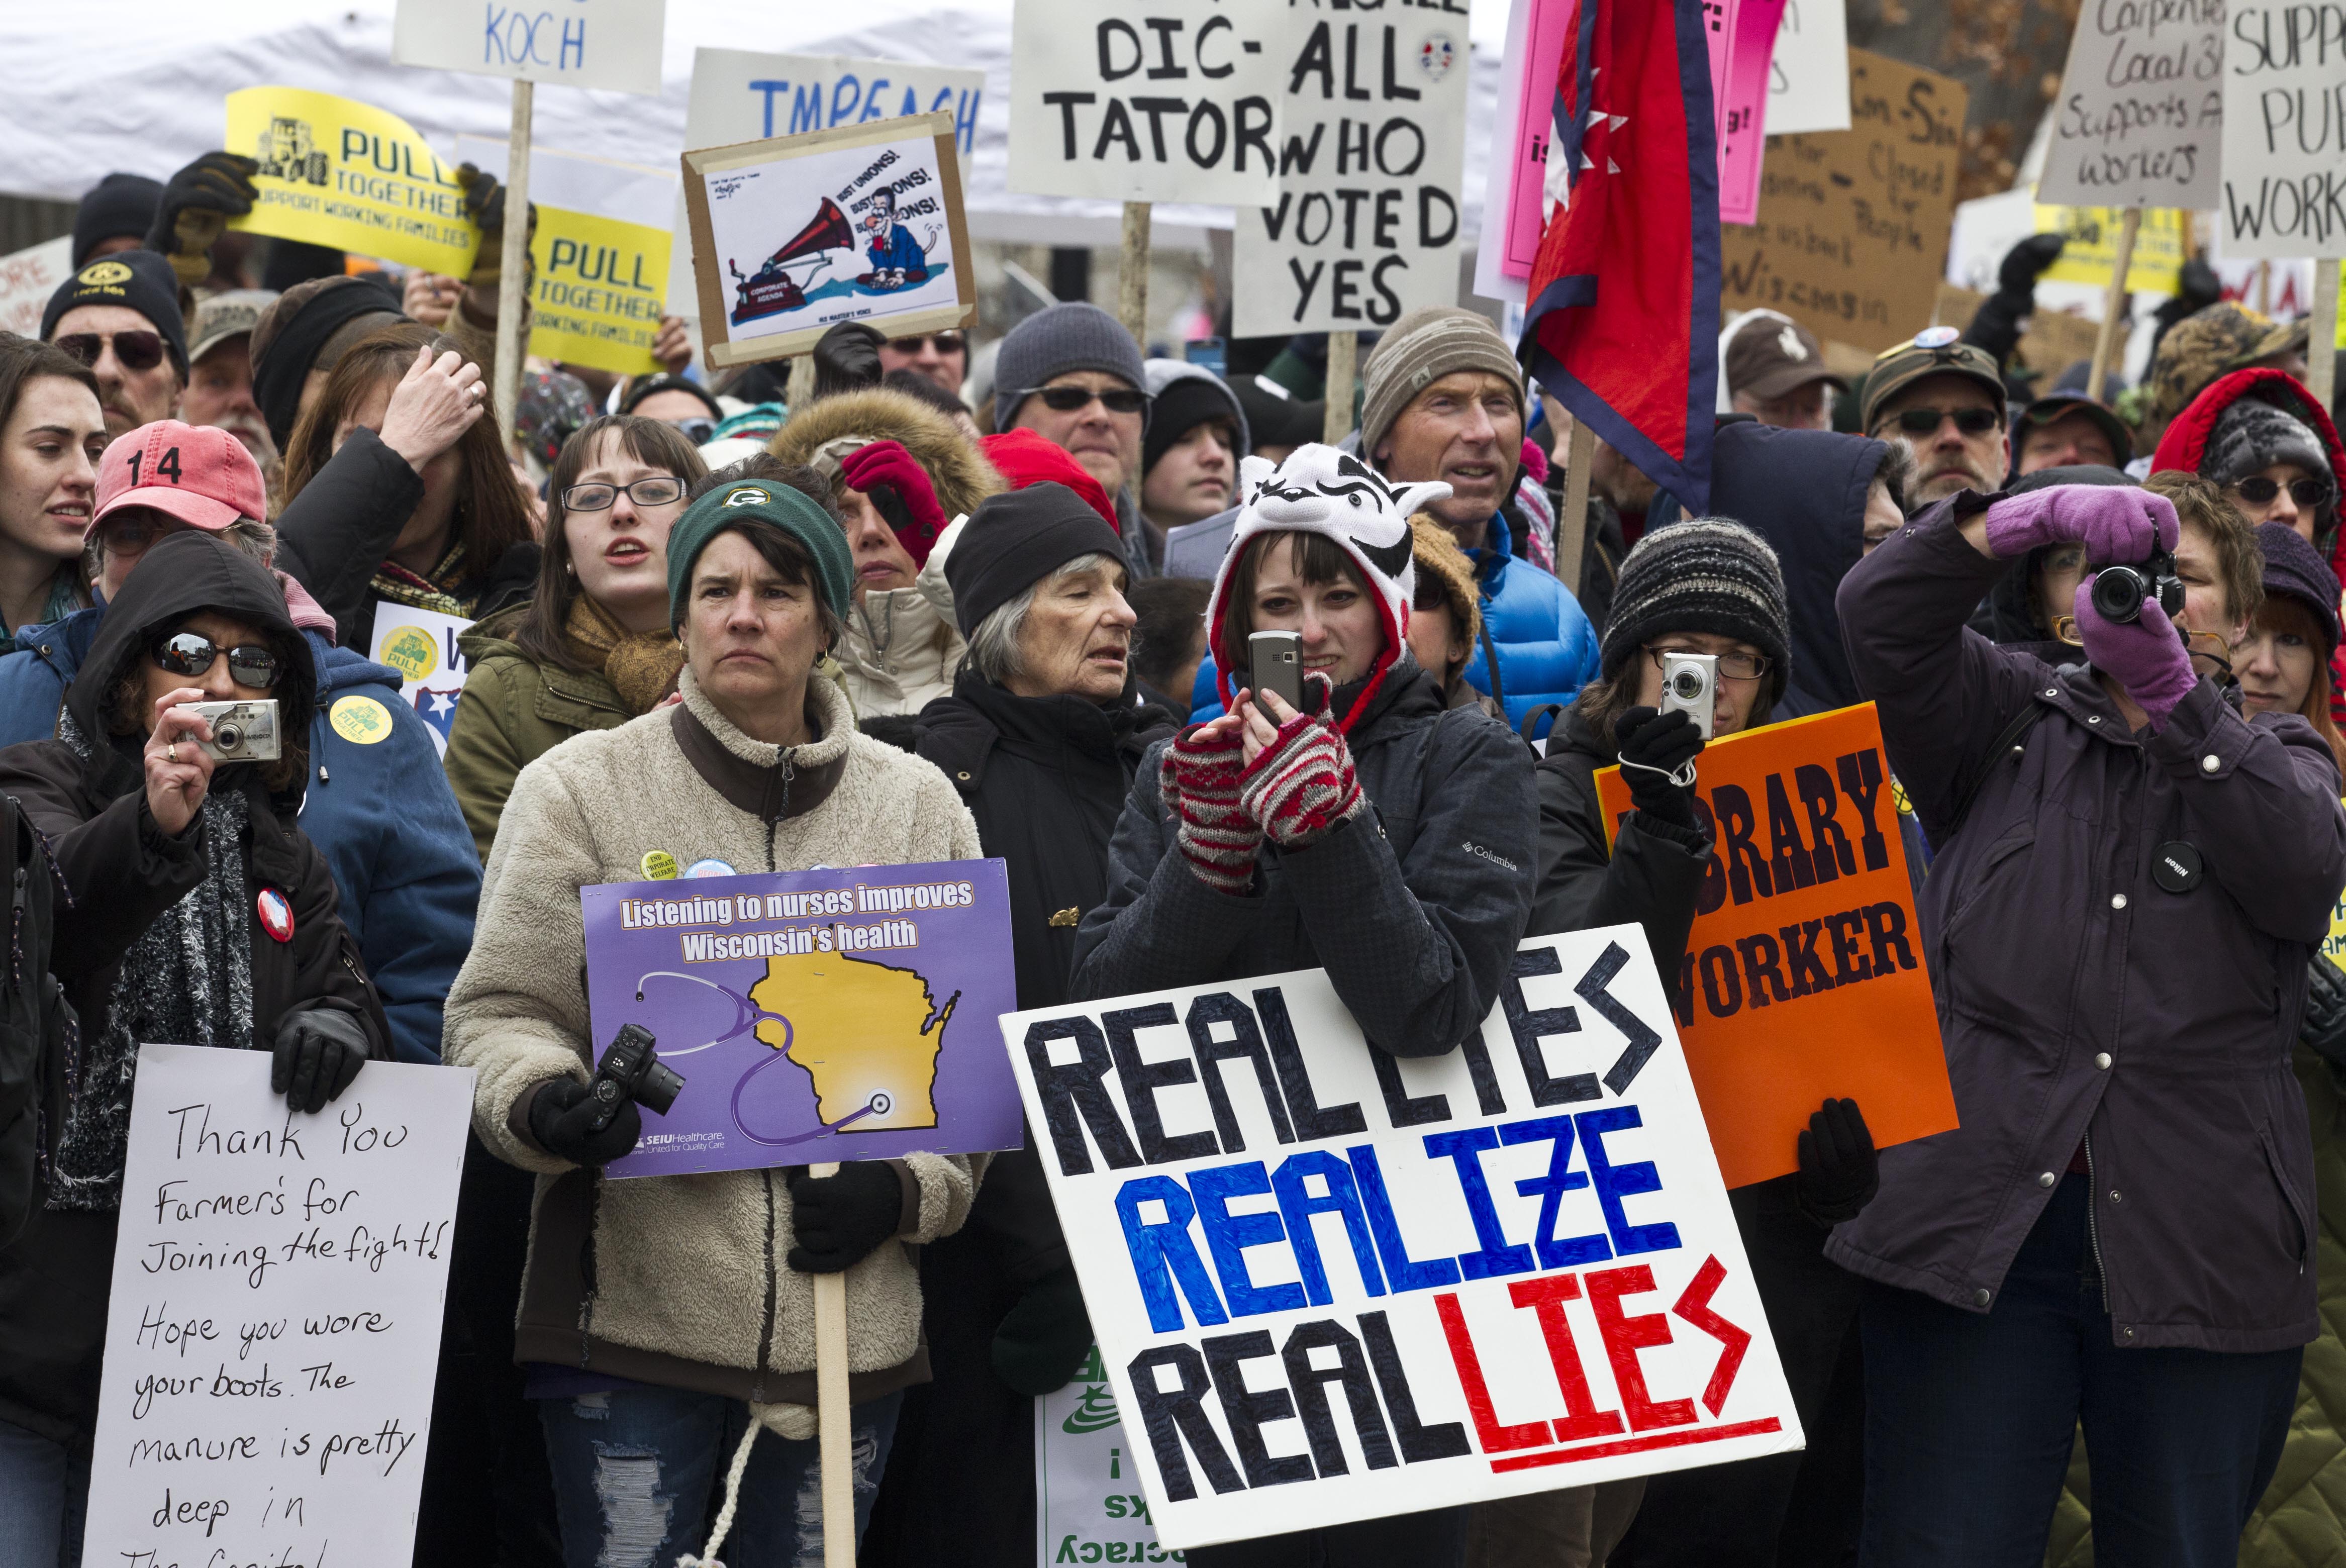 Protesters march outside the state Capitol in Madison, Wis., Saturday, March 12, 2011.  AP Photo/Morry Gash.